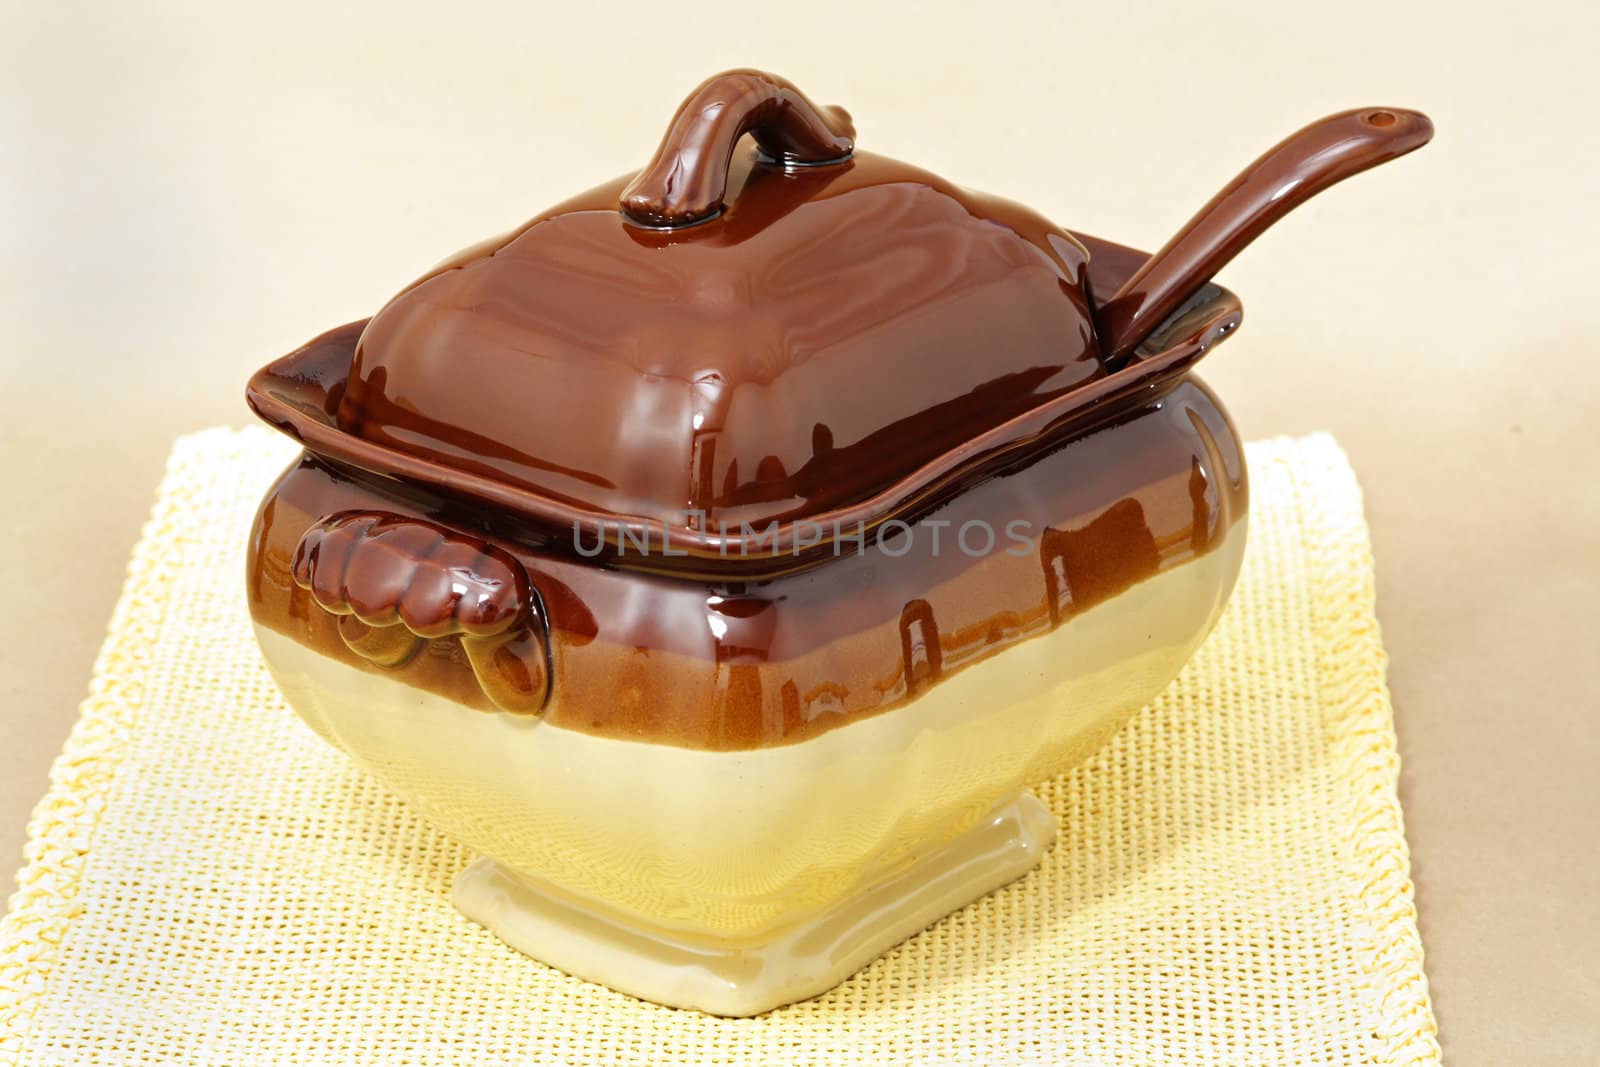 soup tureen on yellow tablecloth, beige background